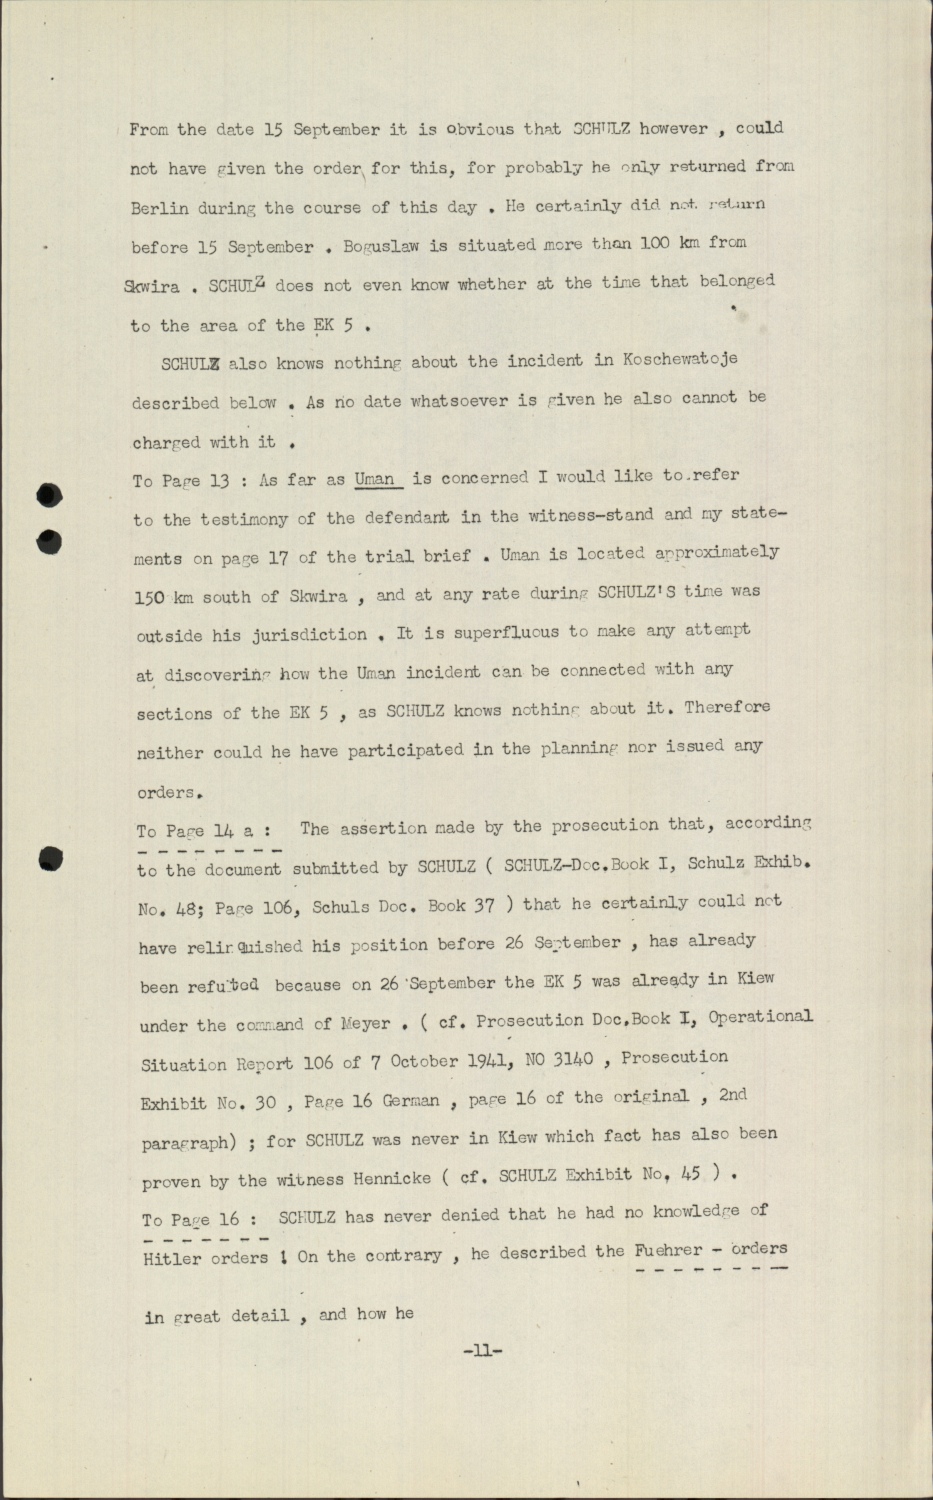 Scanned document page 15